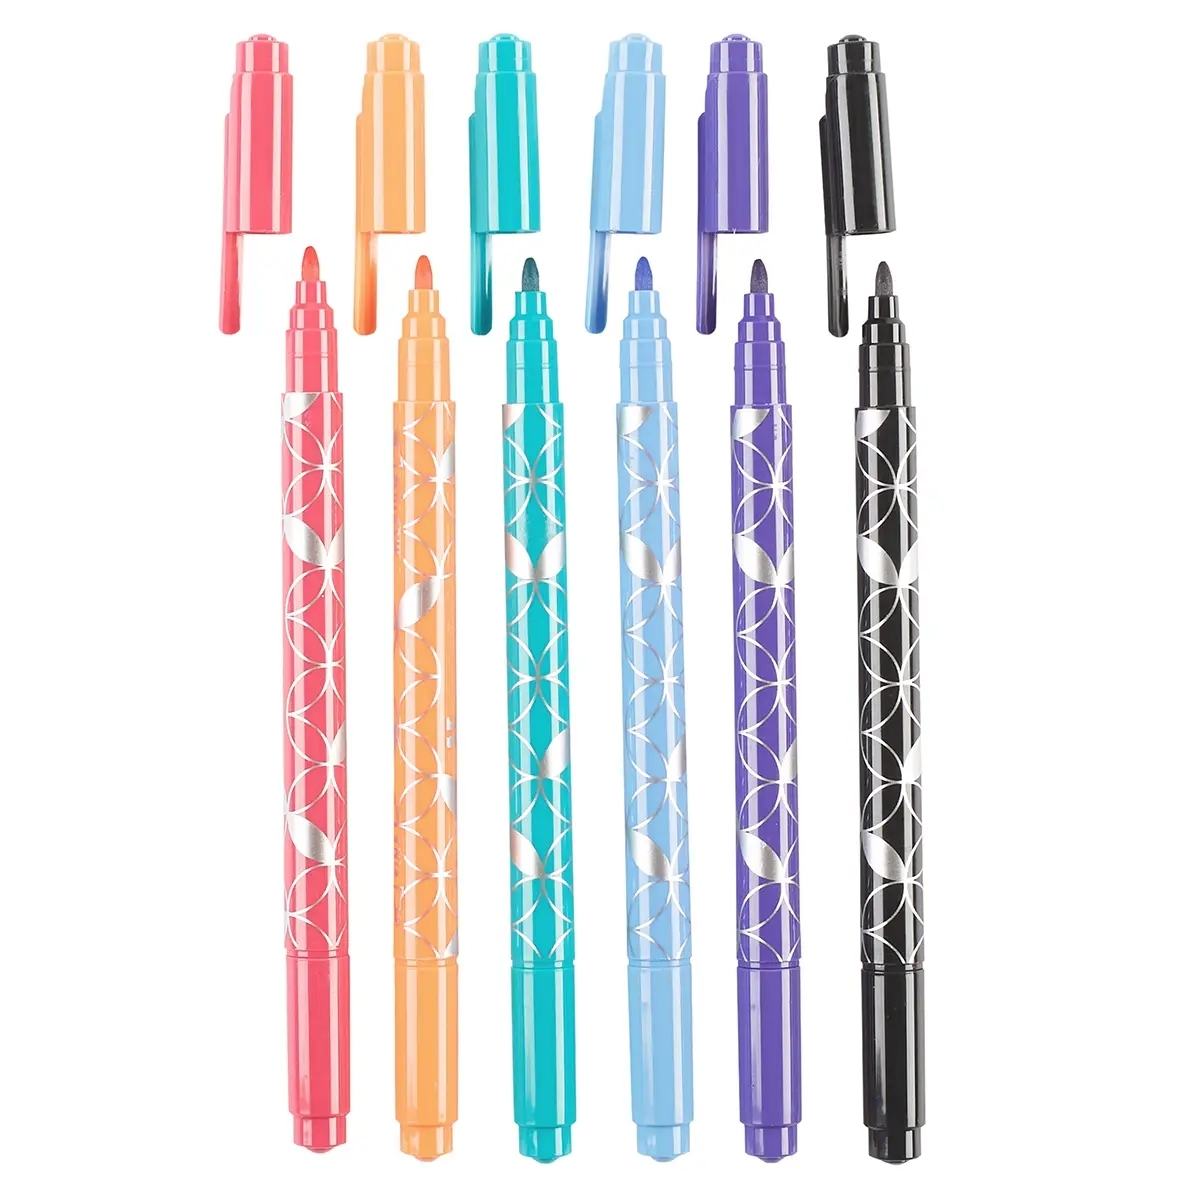 Sunset Focused Dual-Tip Markers 6-Pack